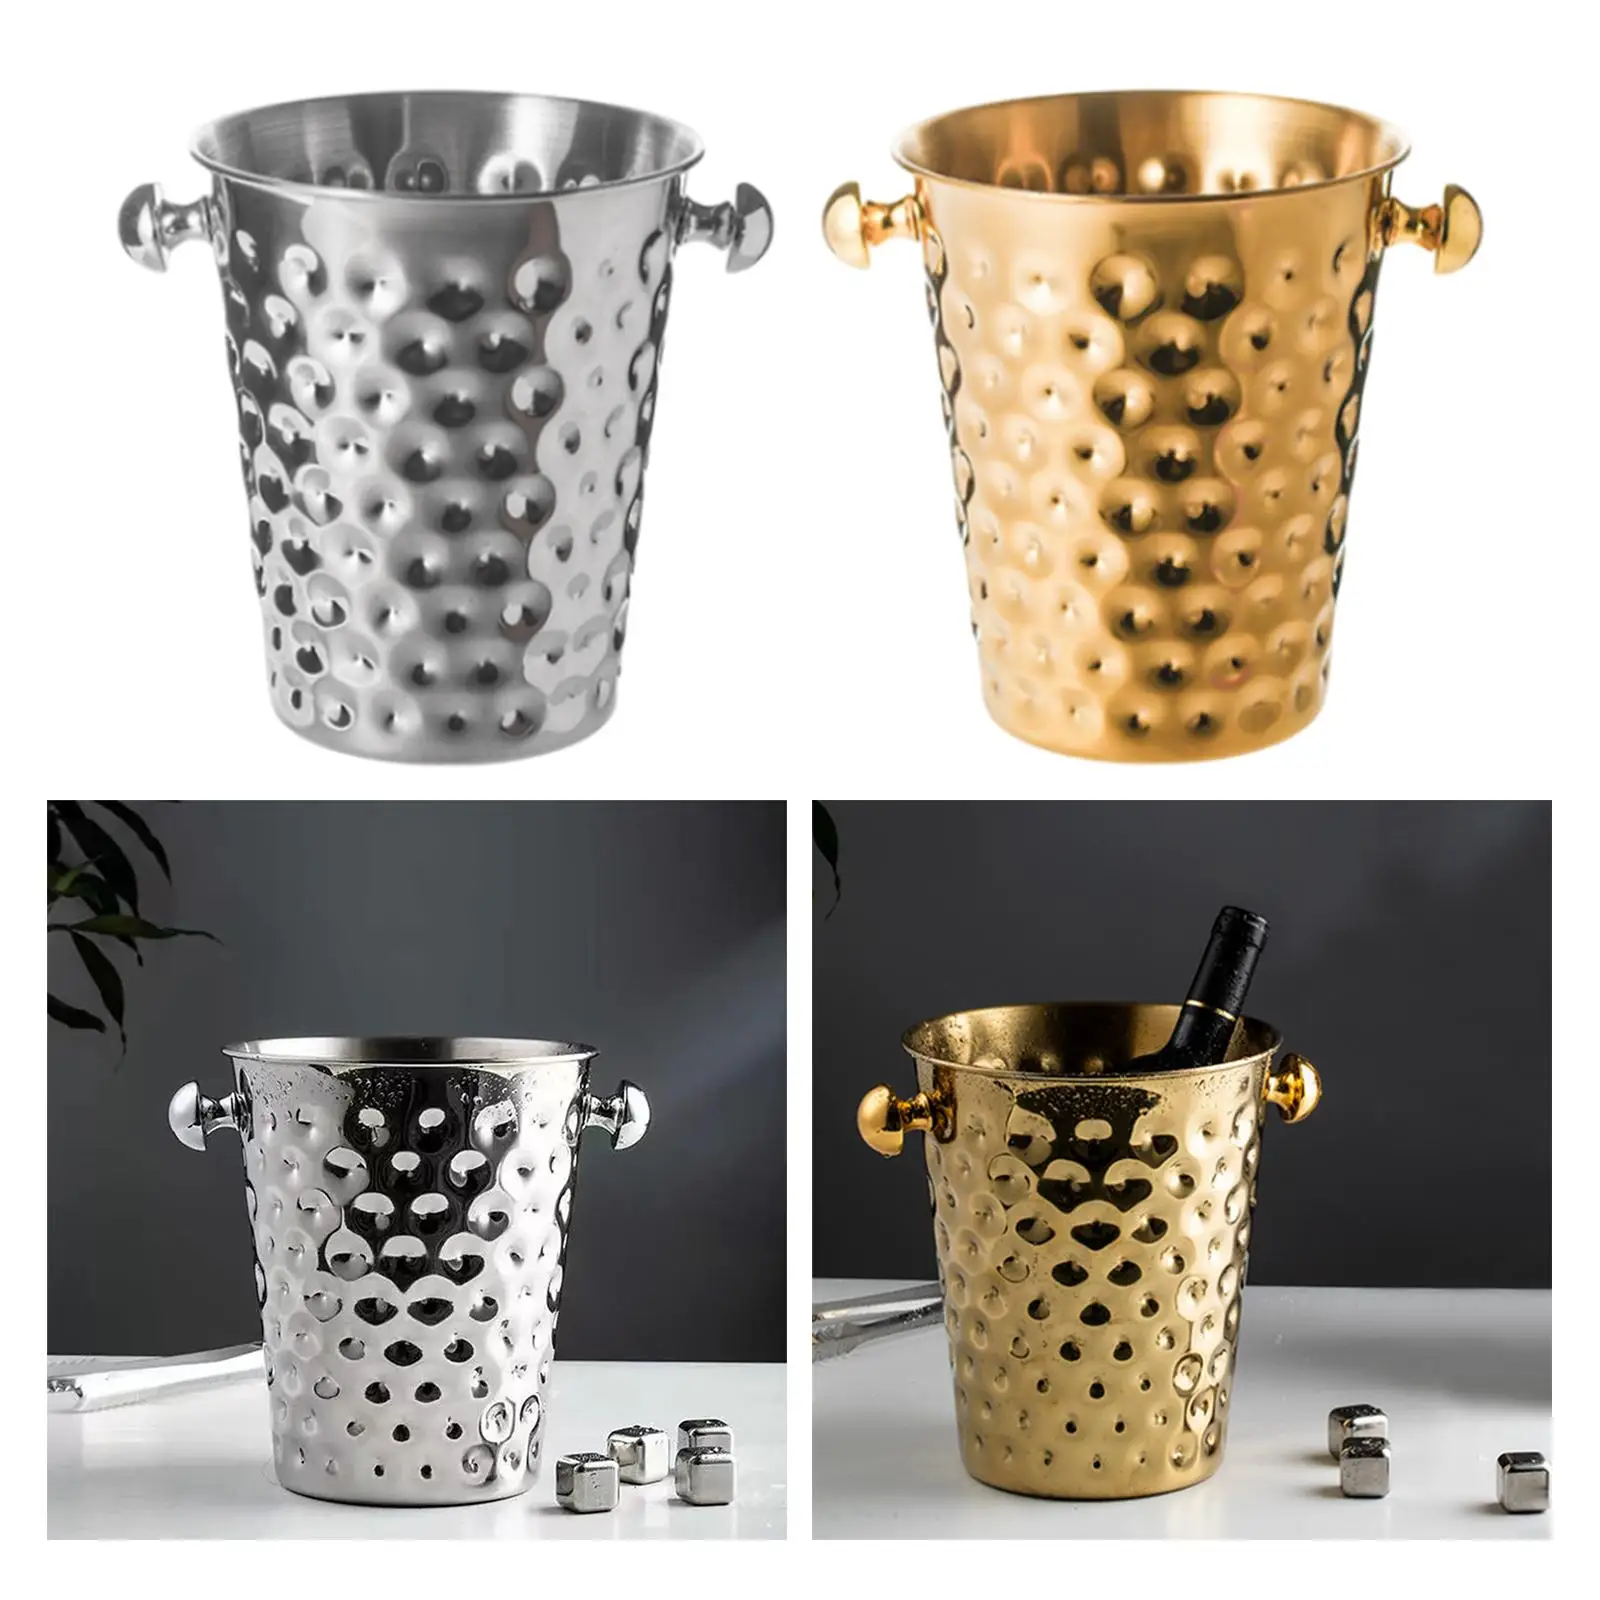 Cooler Bucket Drink Tub Creative Beer Chiller Fashionable Ice Wine Barrel for Party Household Barbecue Restaurant